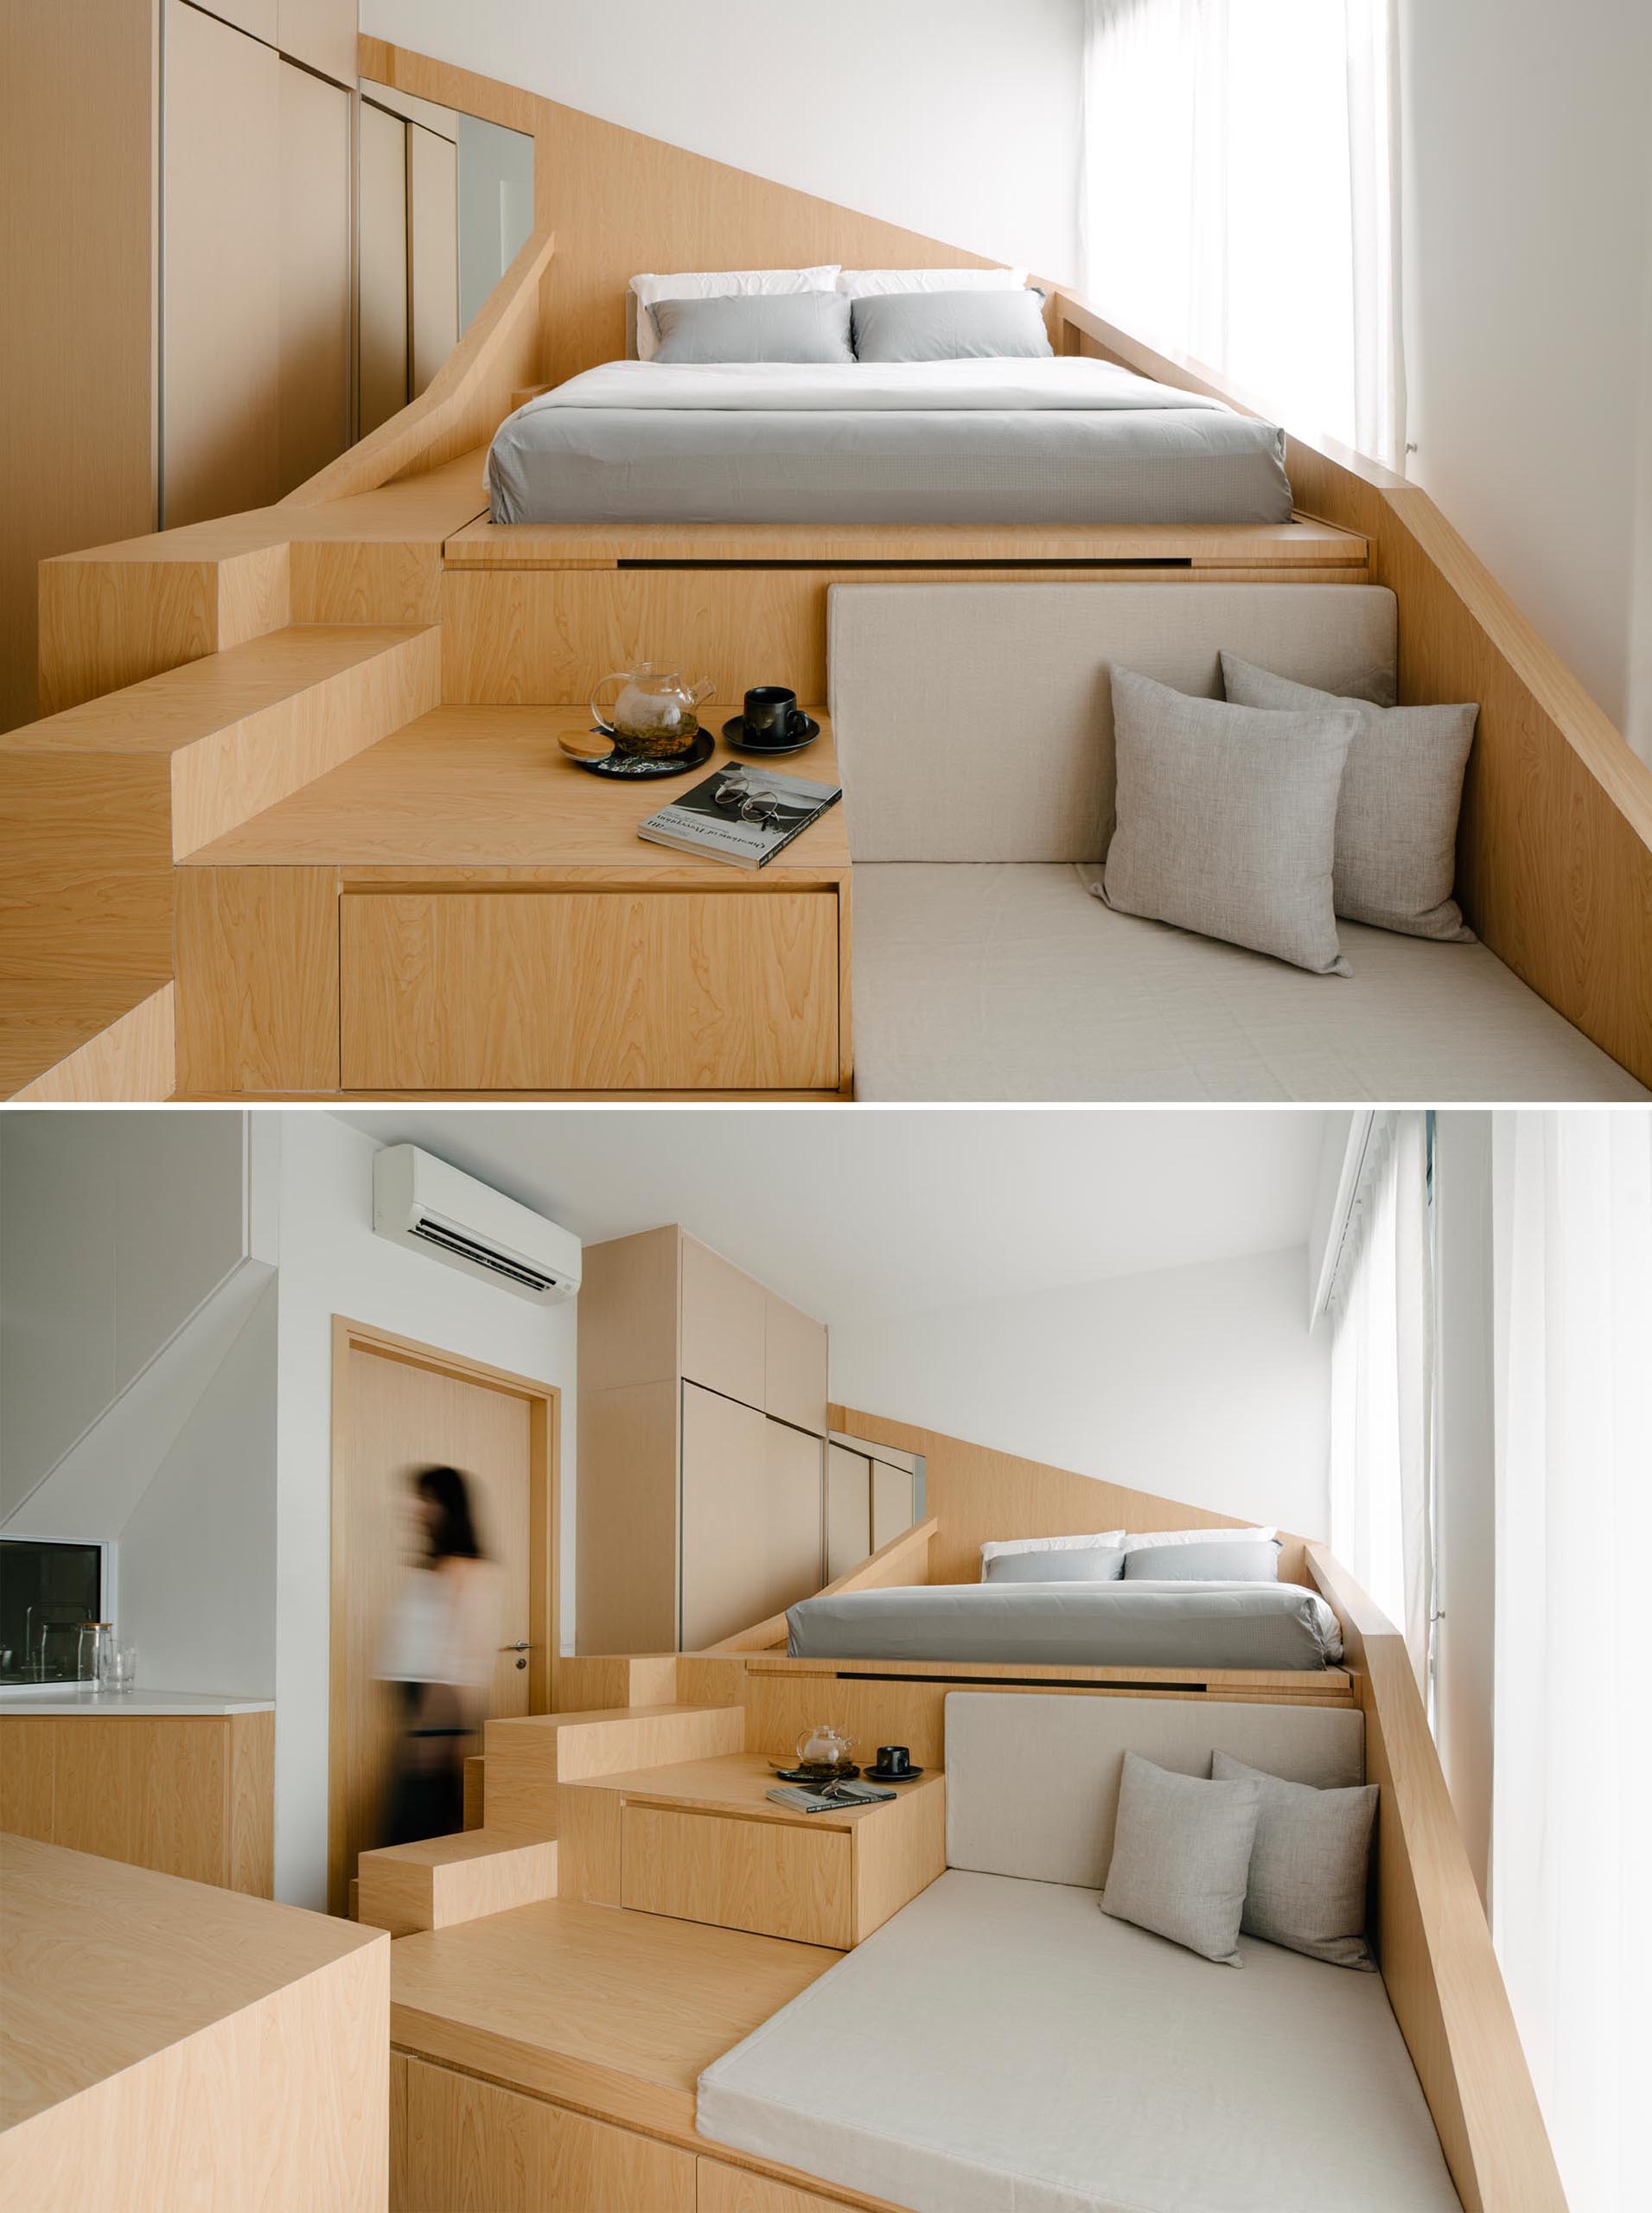 A custom design loft bed with a sofa and storage, has integrated steps up to the bed.